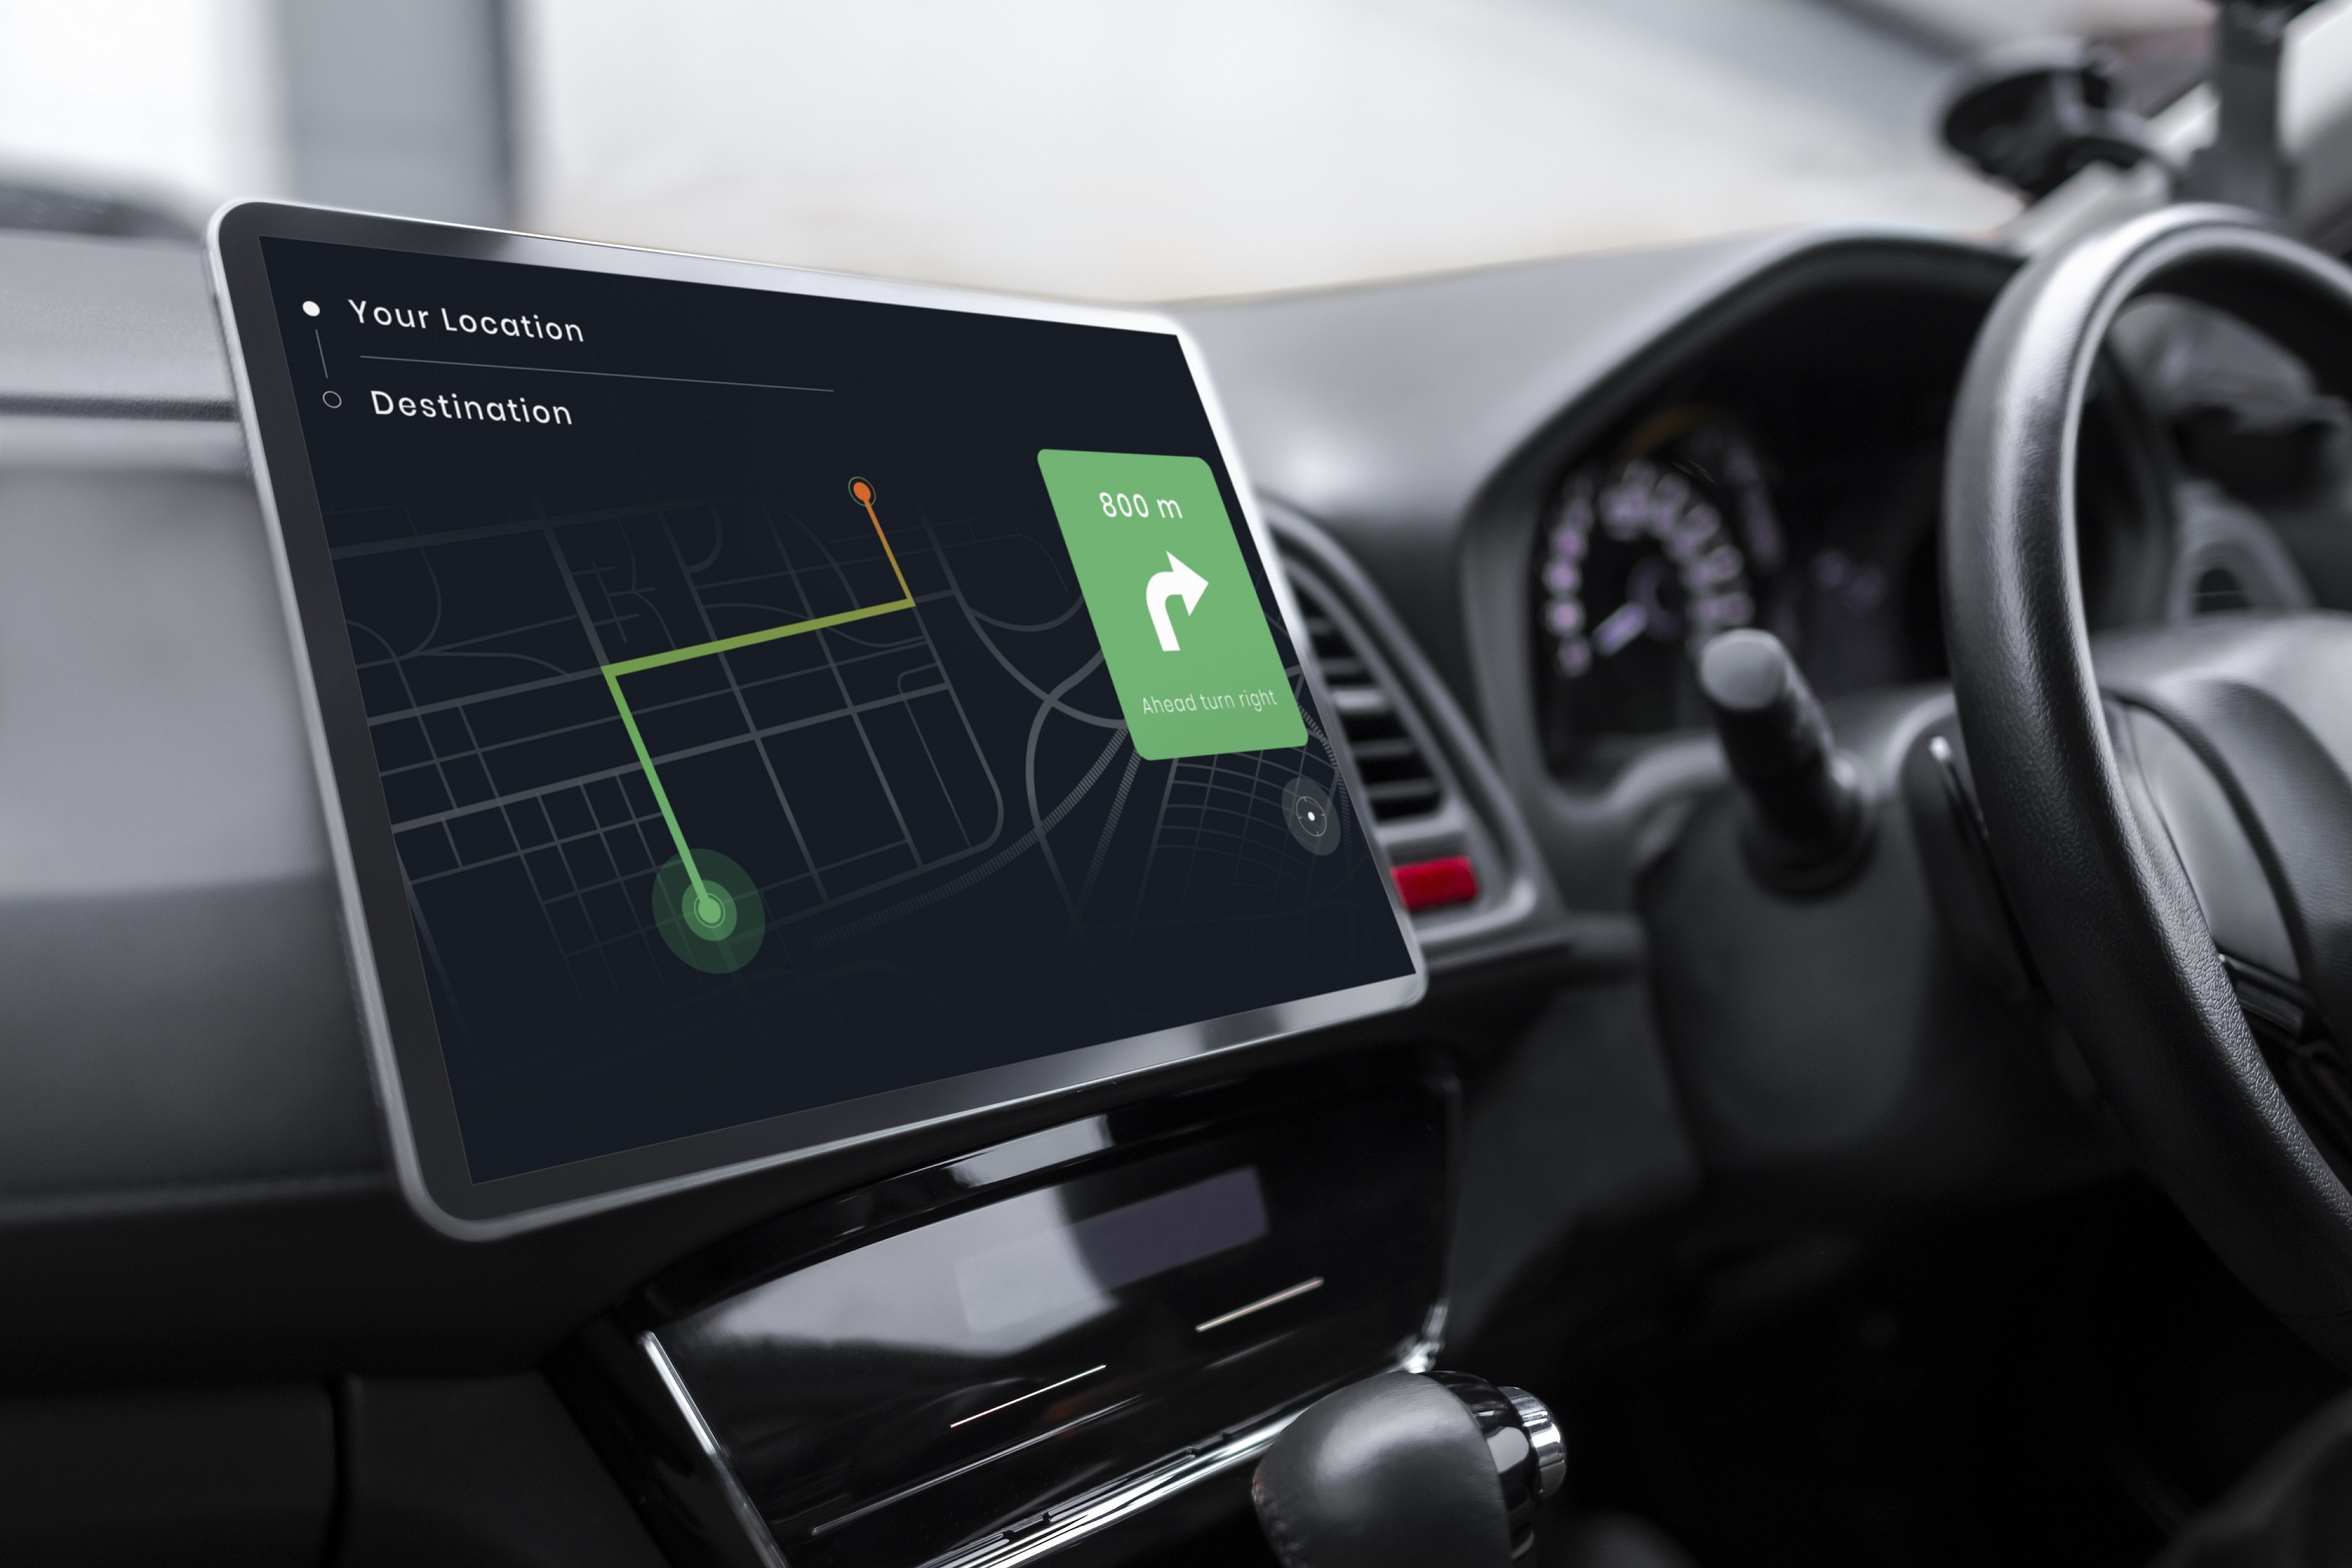 Gps system displayed on map in a smart car